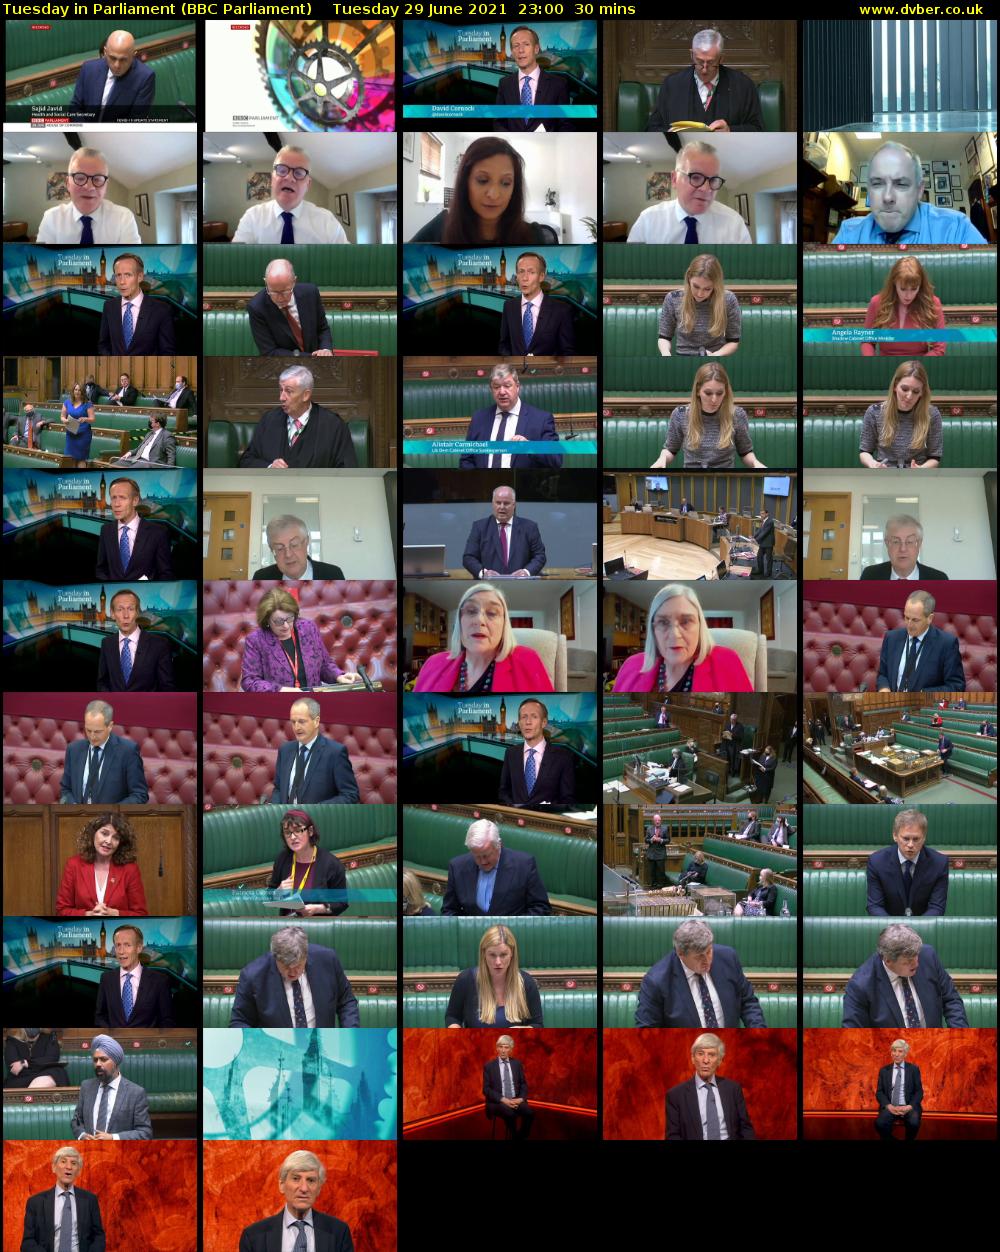 Tuesday in Parliament (BBC Parliament) Tuesday 29 June 2021 23:00 - 23:30